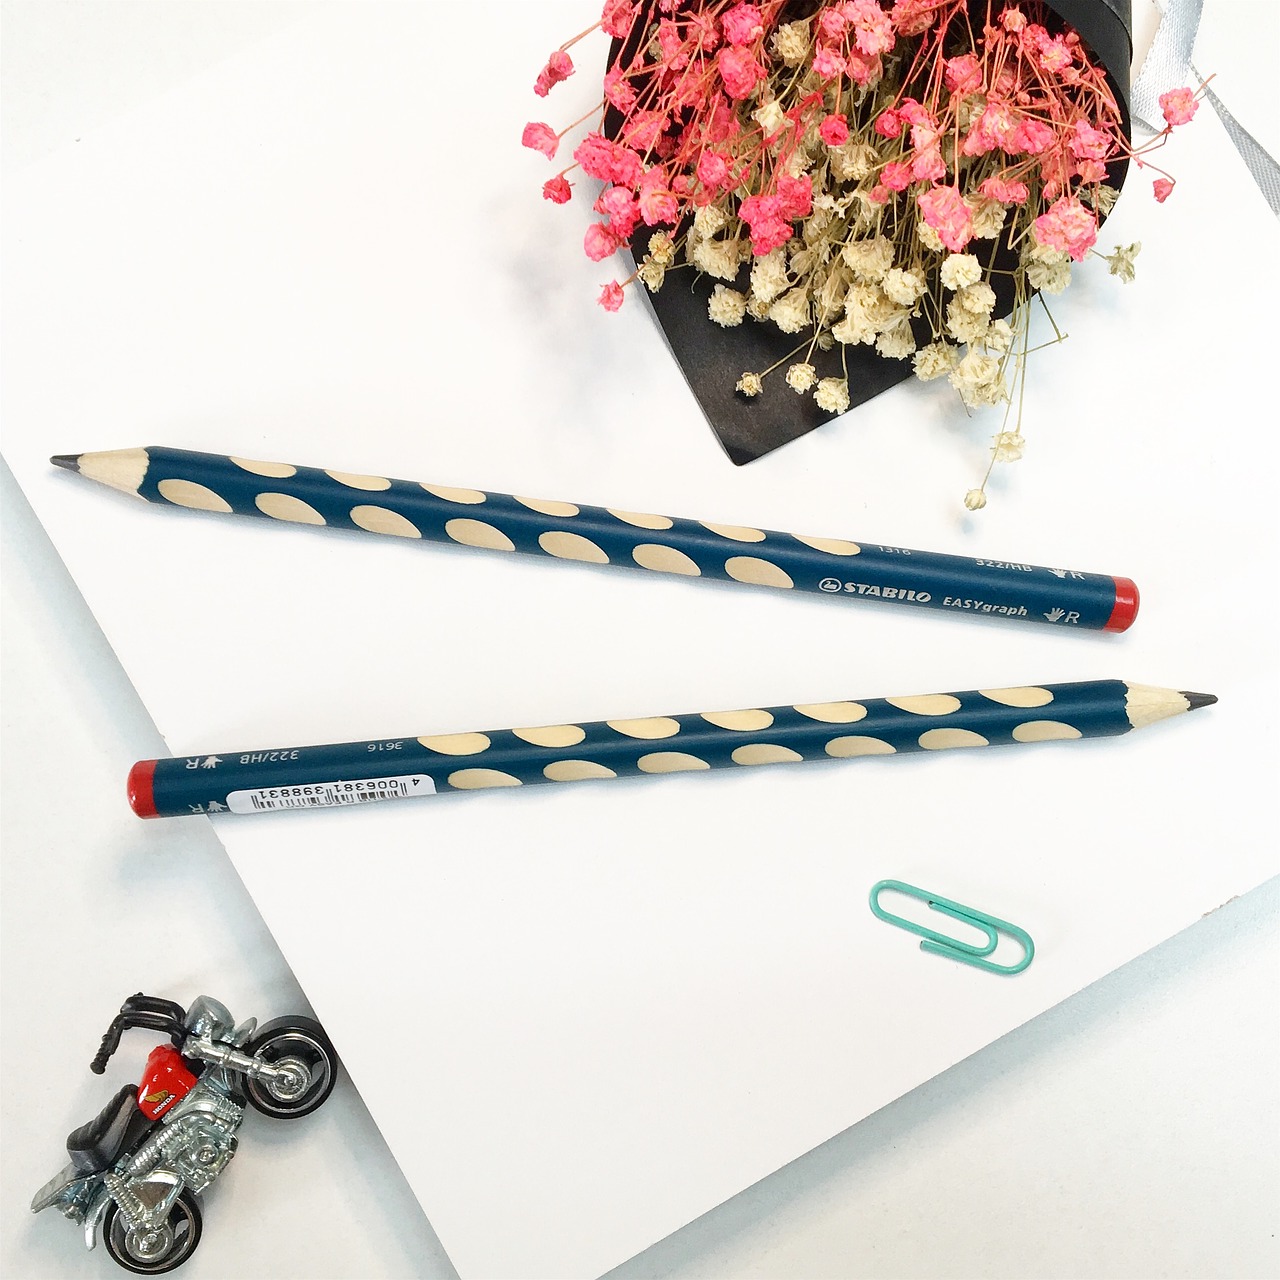 stabilo stationery hold a pencil music pencil free photo